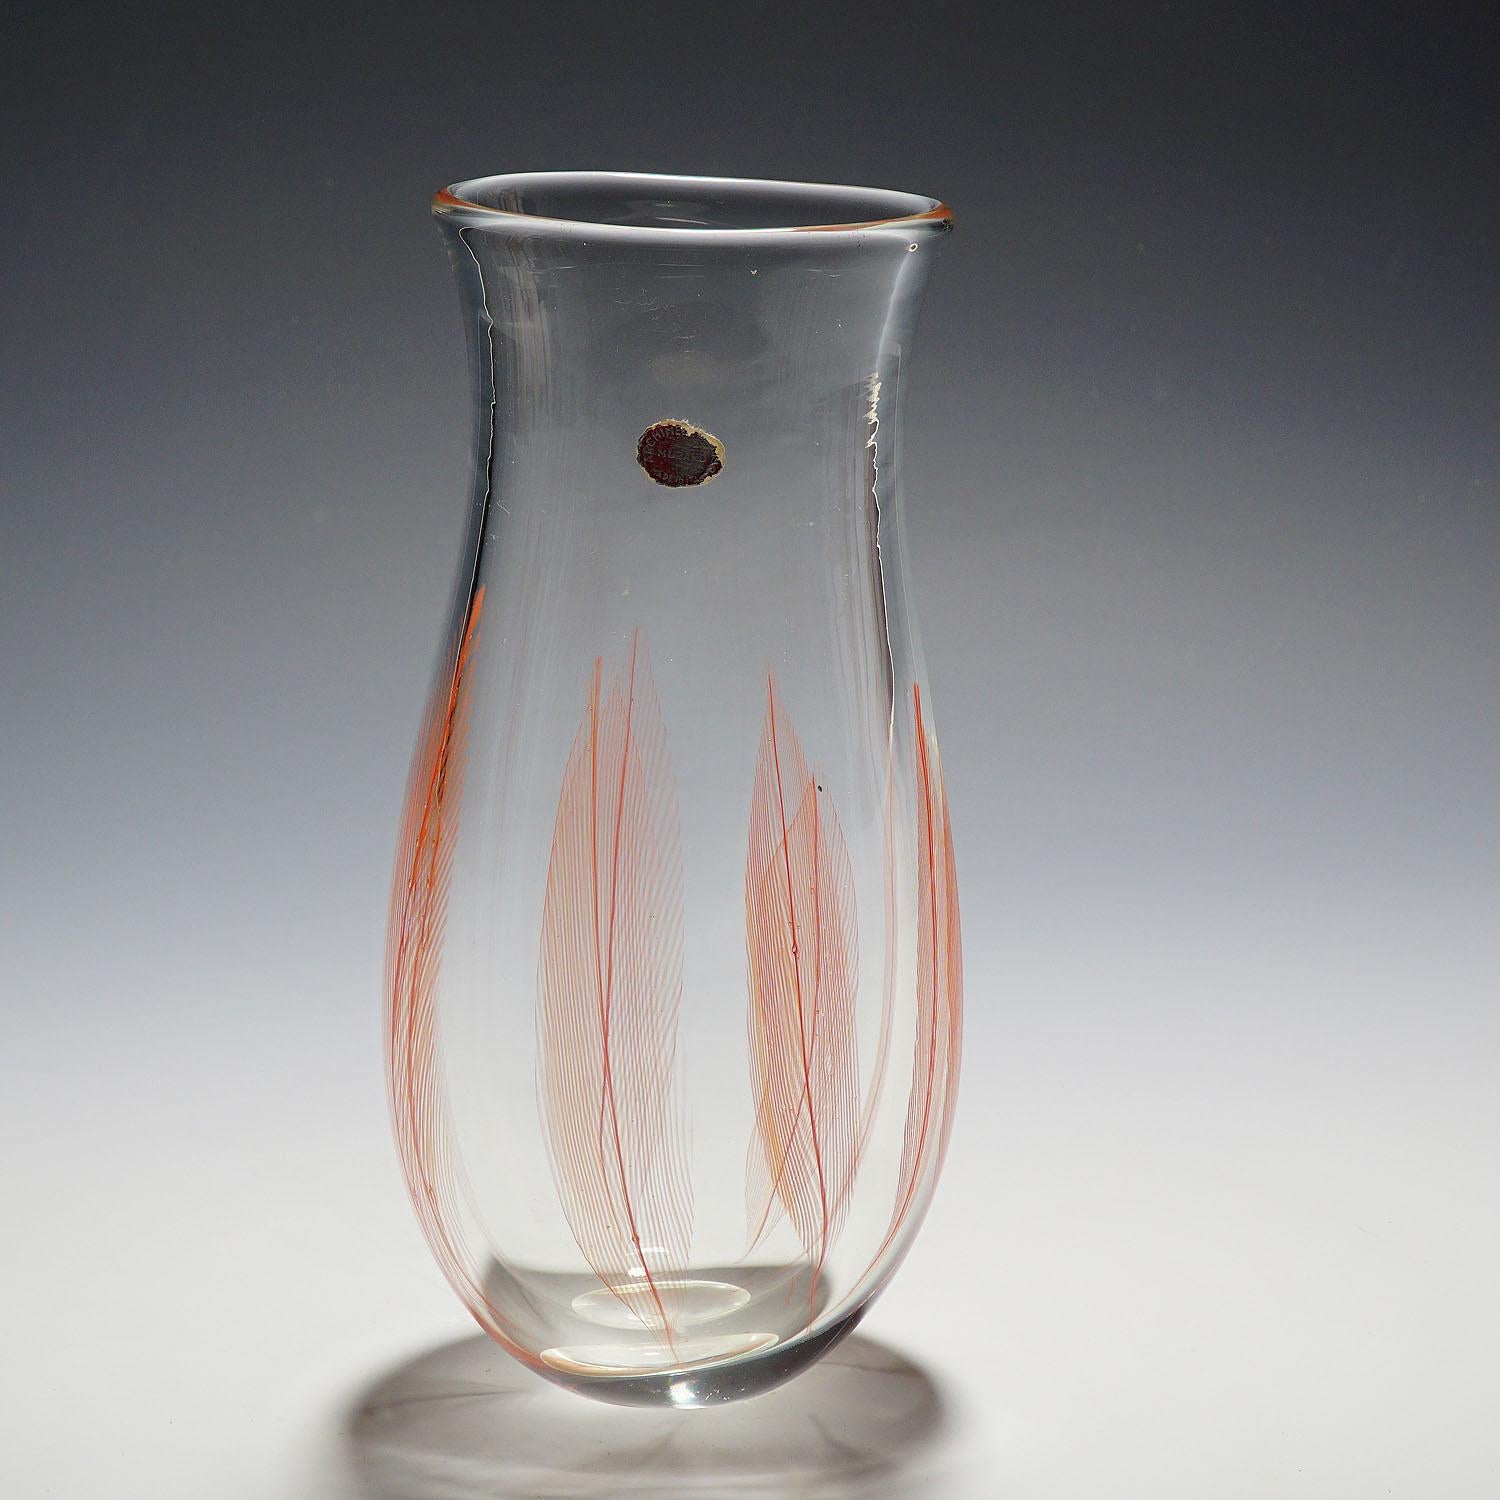 A Venetian art glass vase of the 'Piume' (feather) series. Designed by Archimede Seguso for Vetreria Artistica Archimede Seguso ca. 1956. Thick clear glass internally decorated with coral red glass feathers. A famous design of Murano's Master of the